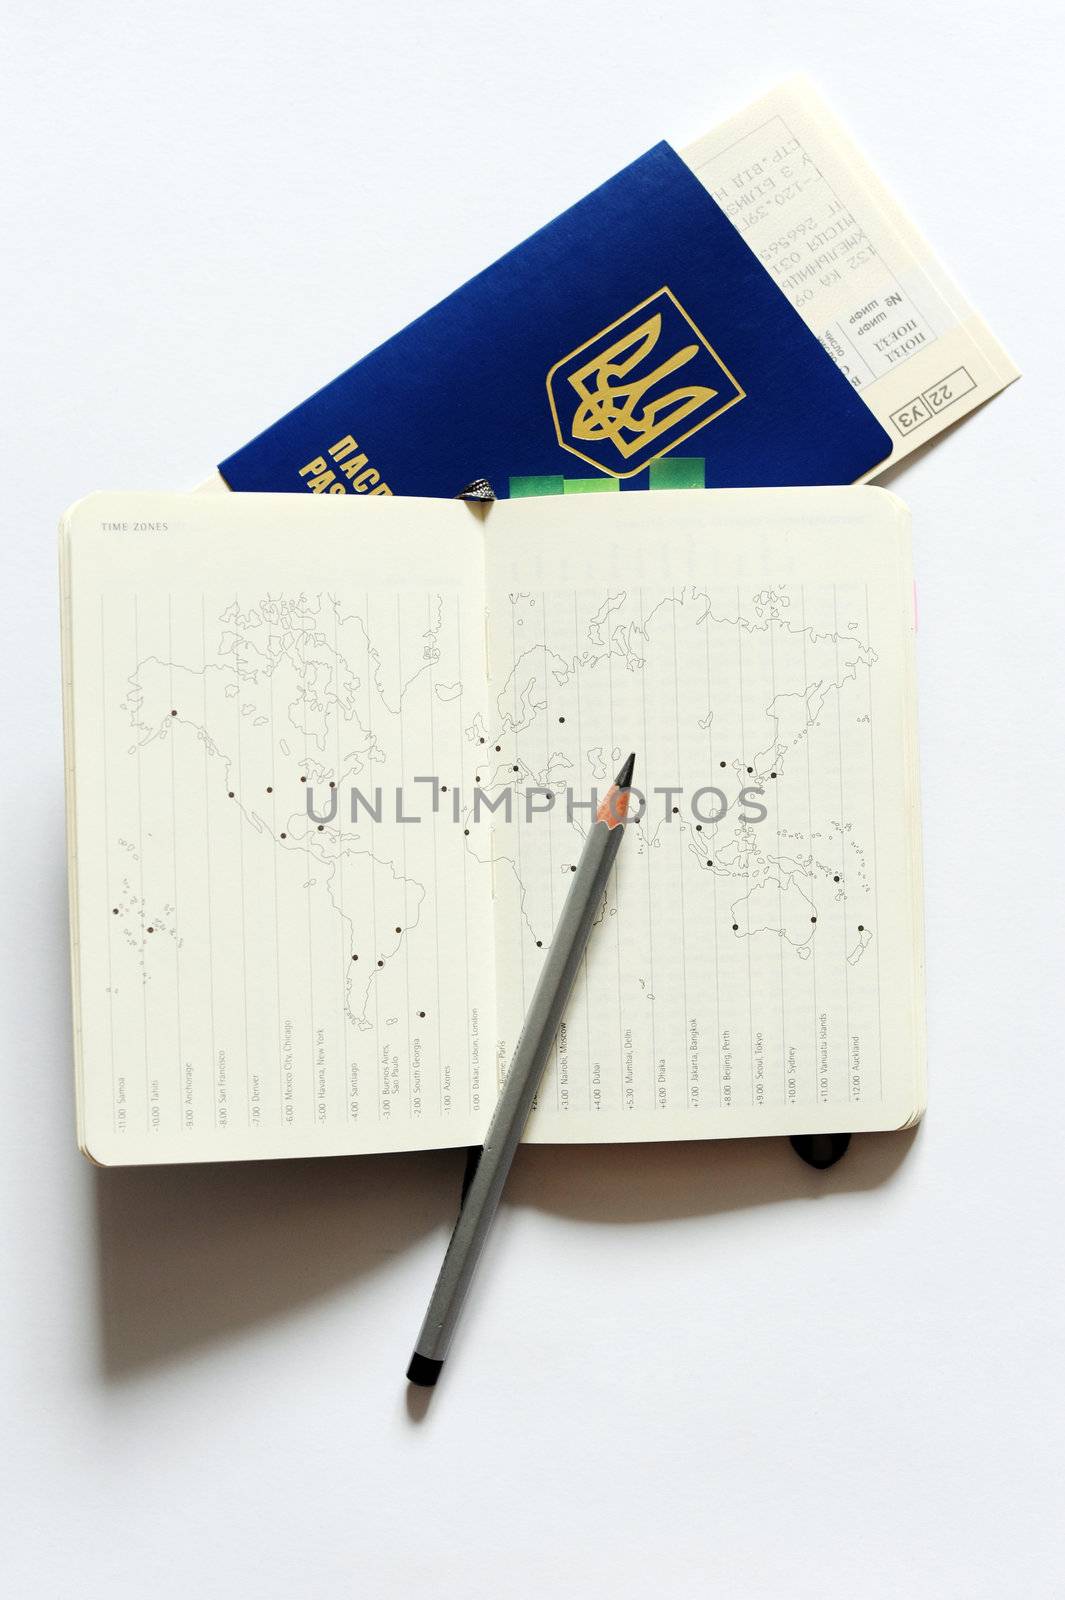 An image of a map and a passport on white background